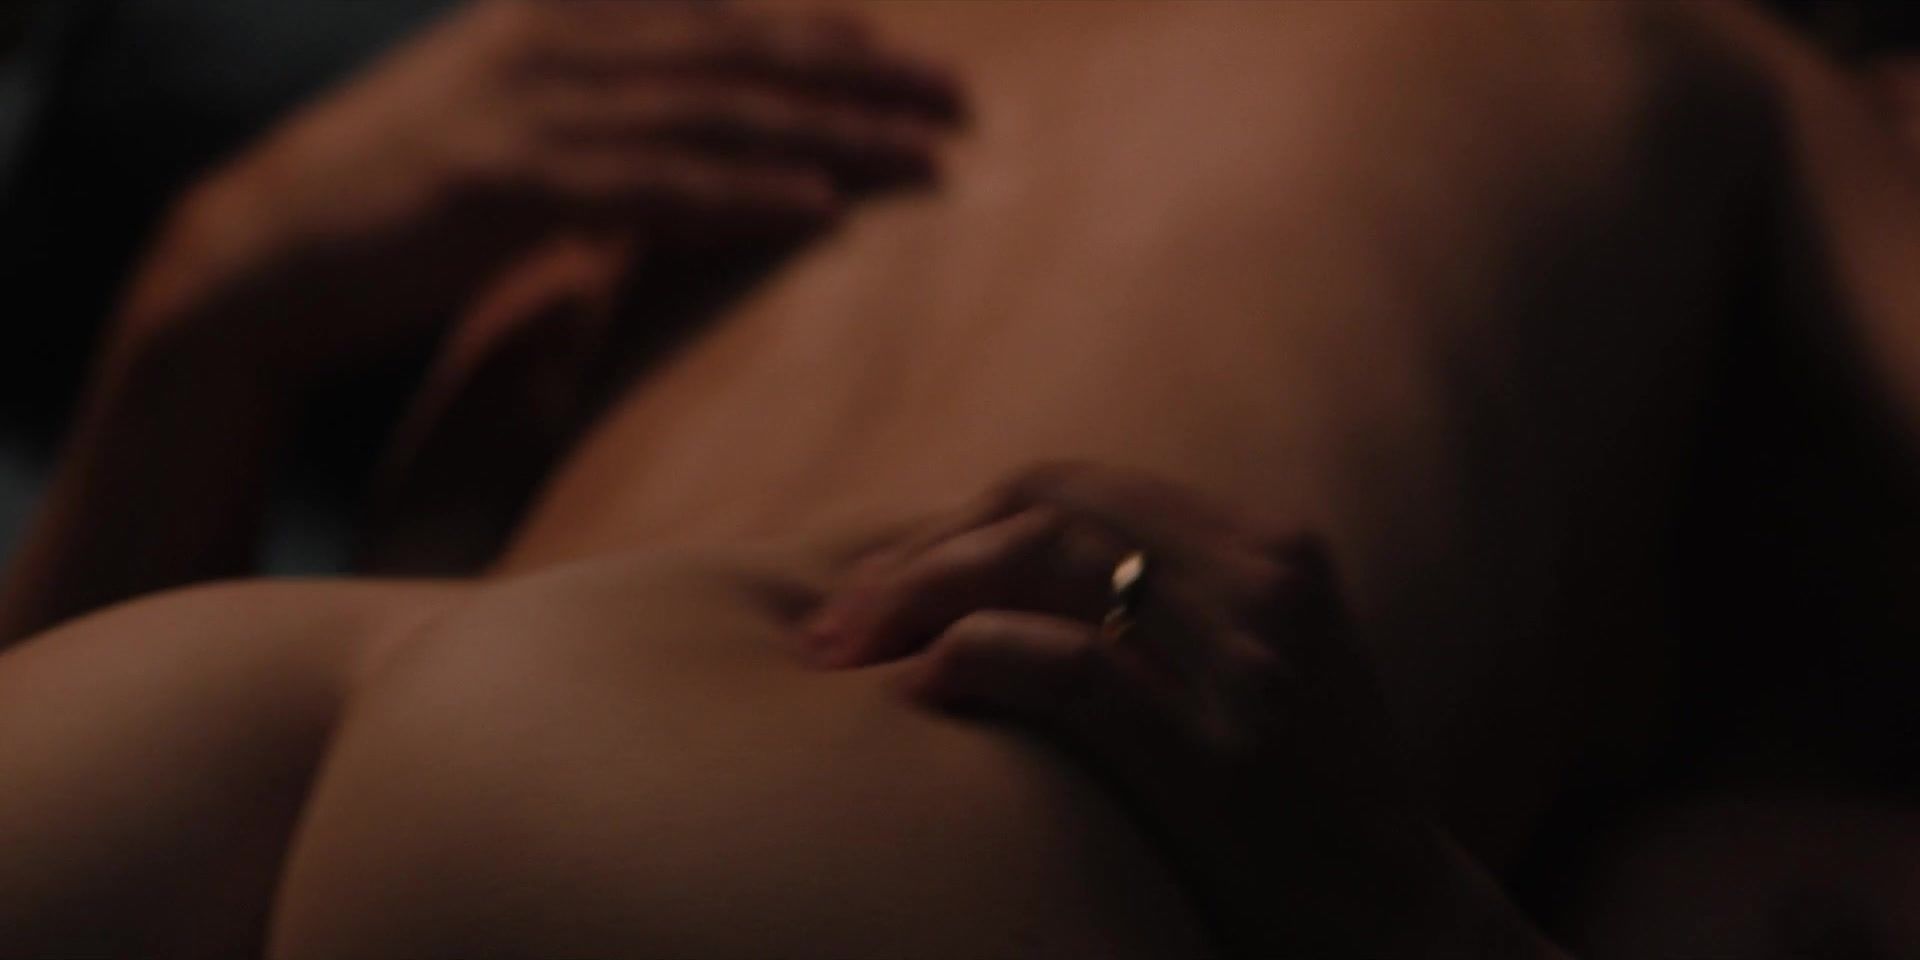 Blowjobs Kelsey Asbille nude - Yellowstone s02e07 (2019) Insane Porn - 1